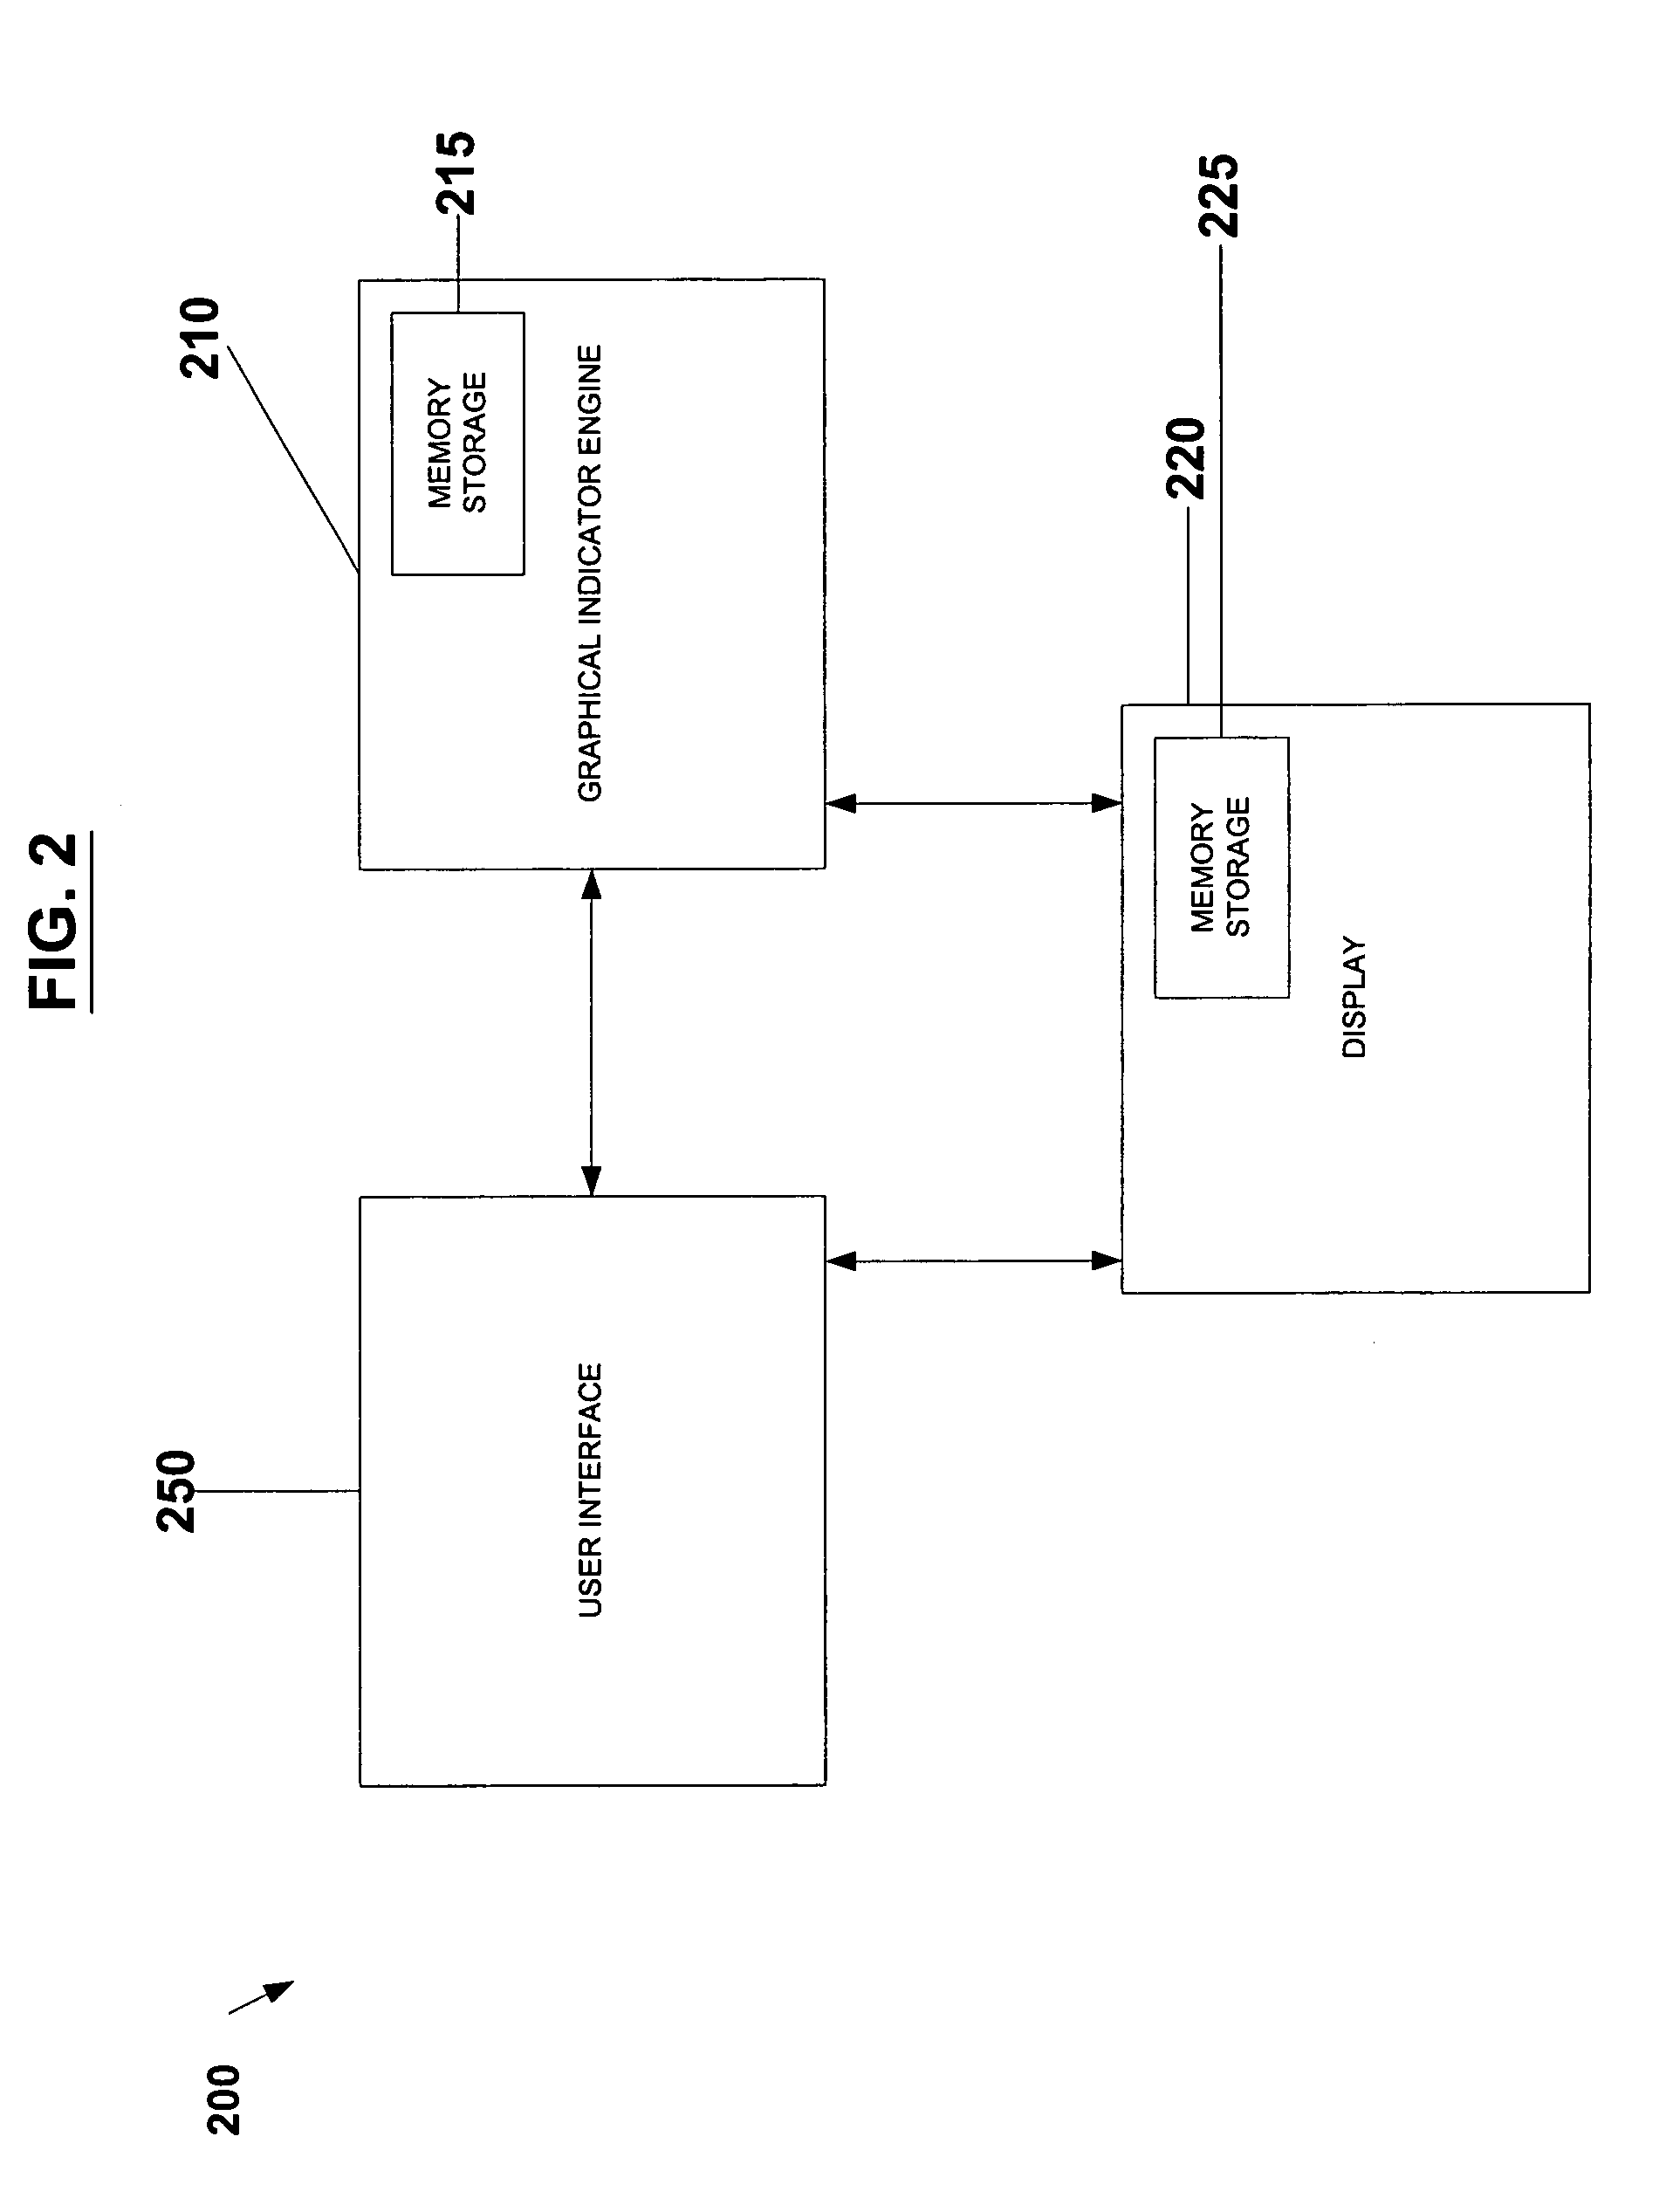 Method and system for displaying an image instead of data